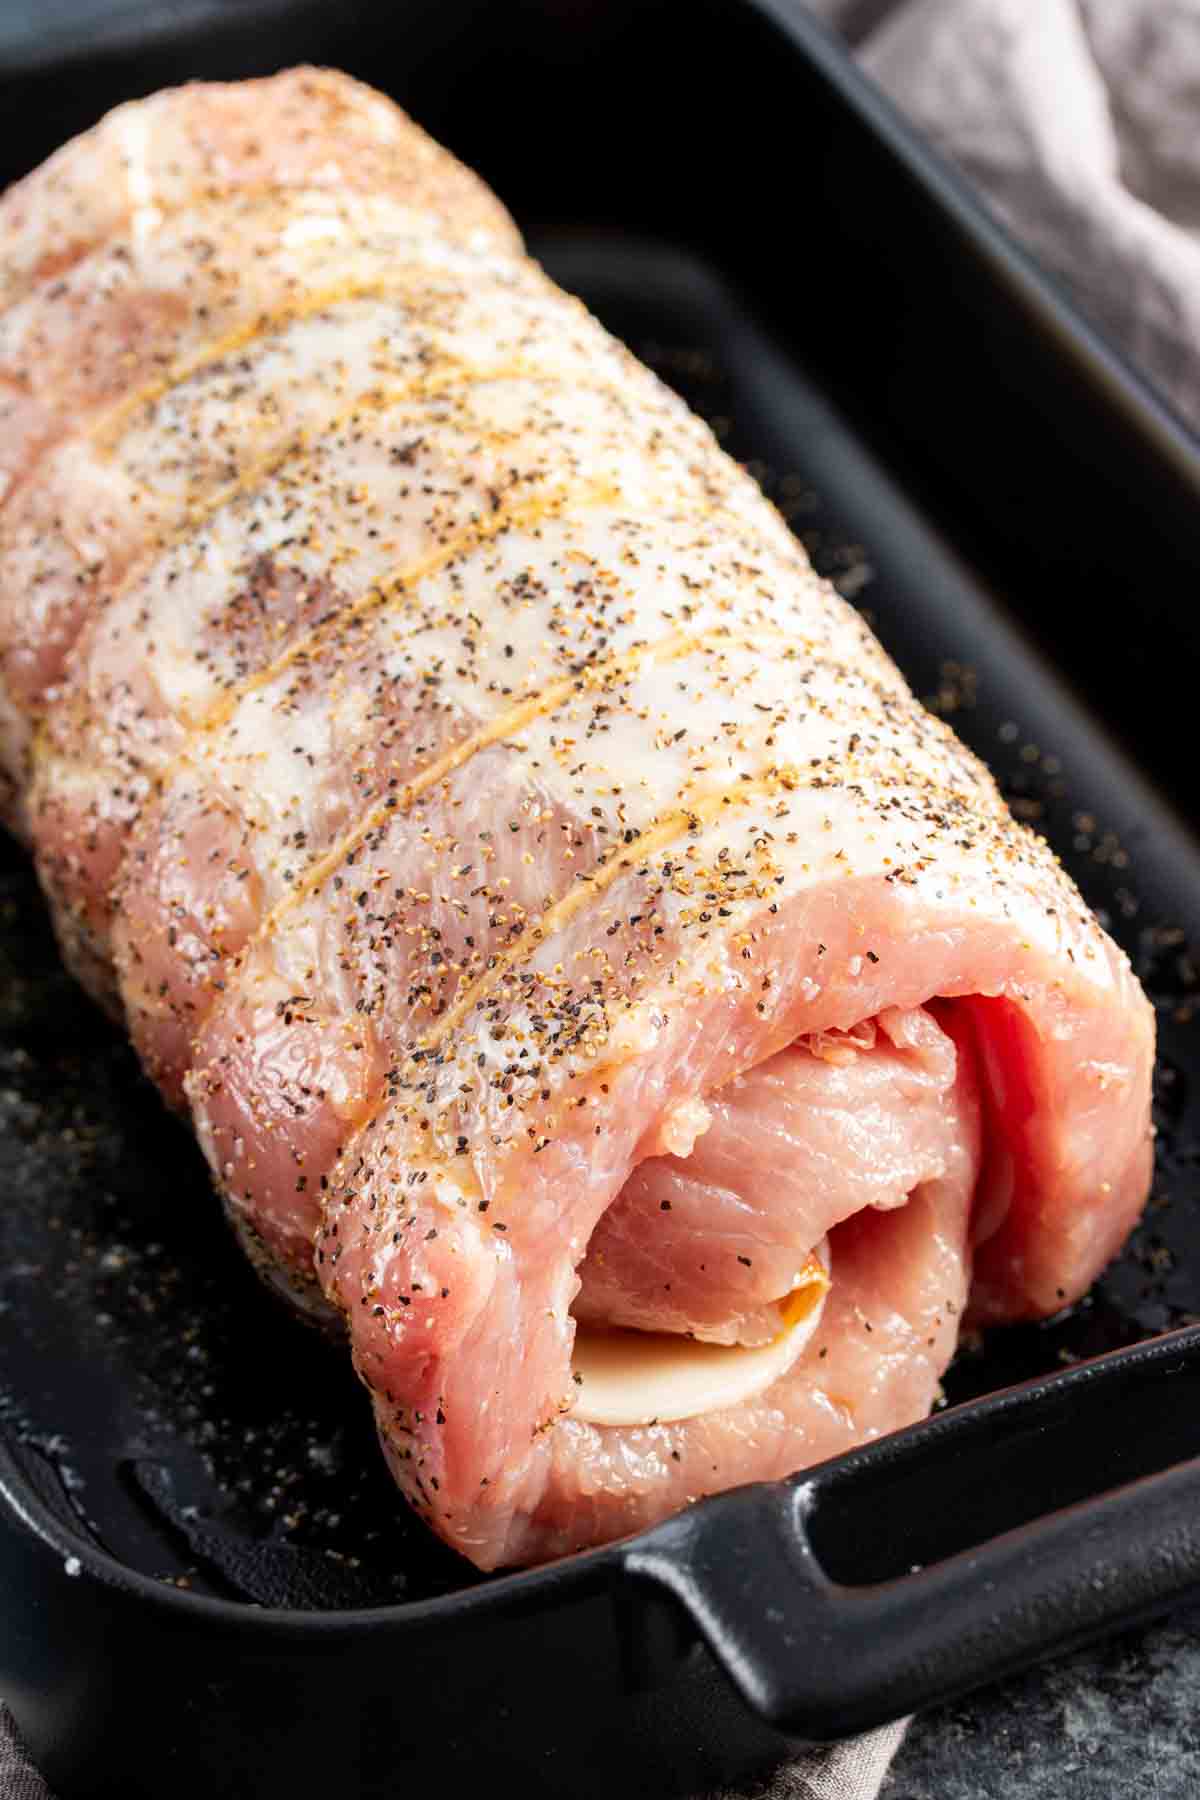 Provolone and Prosciutto Stuffed Pork Loin in a baking pan.